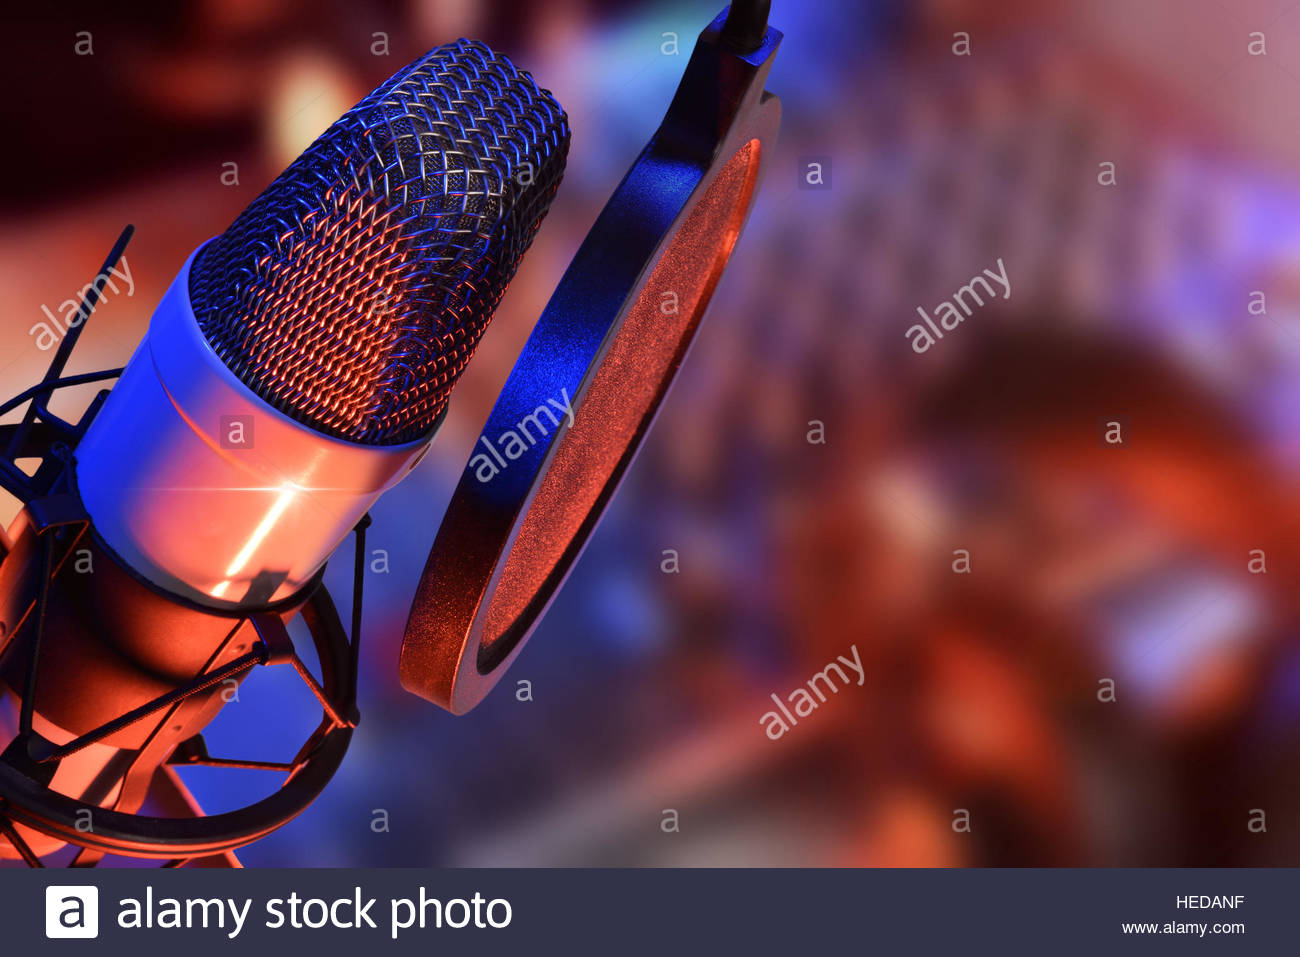 Studio Microphone With Headphones And Mixer Background Blue